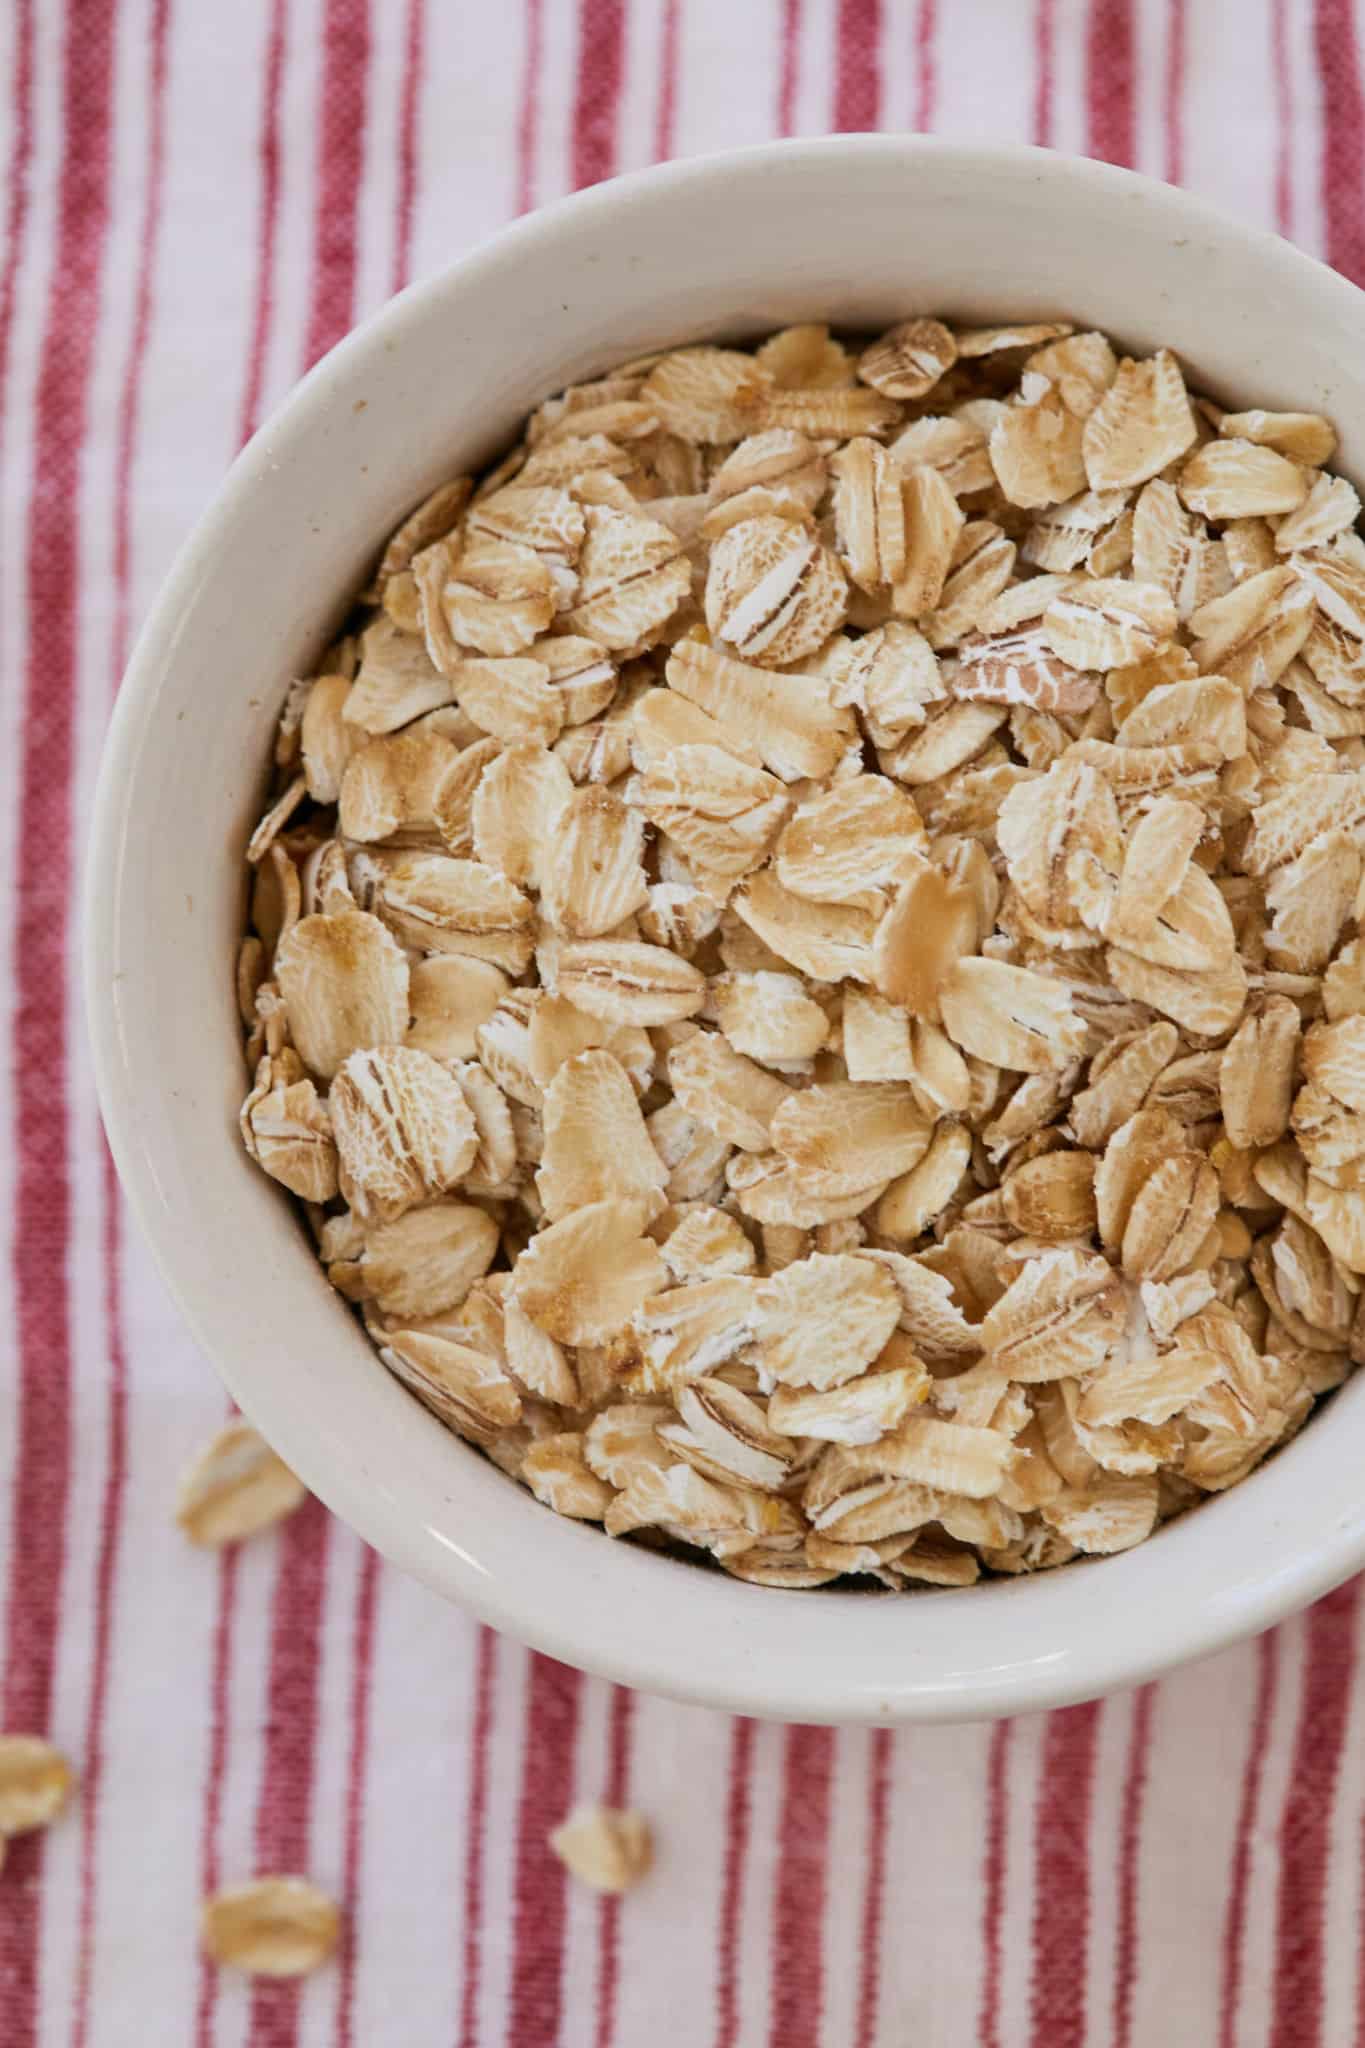 A close up image of old-fashioned oats, a type of oat that is ideal for baking. 